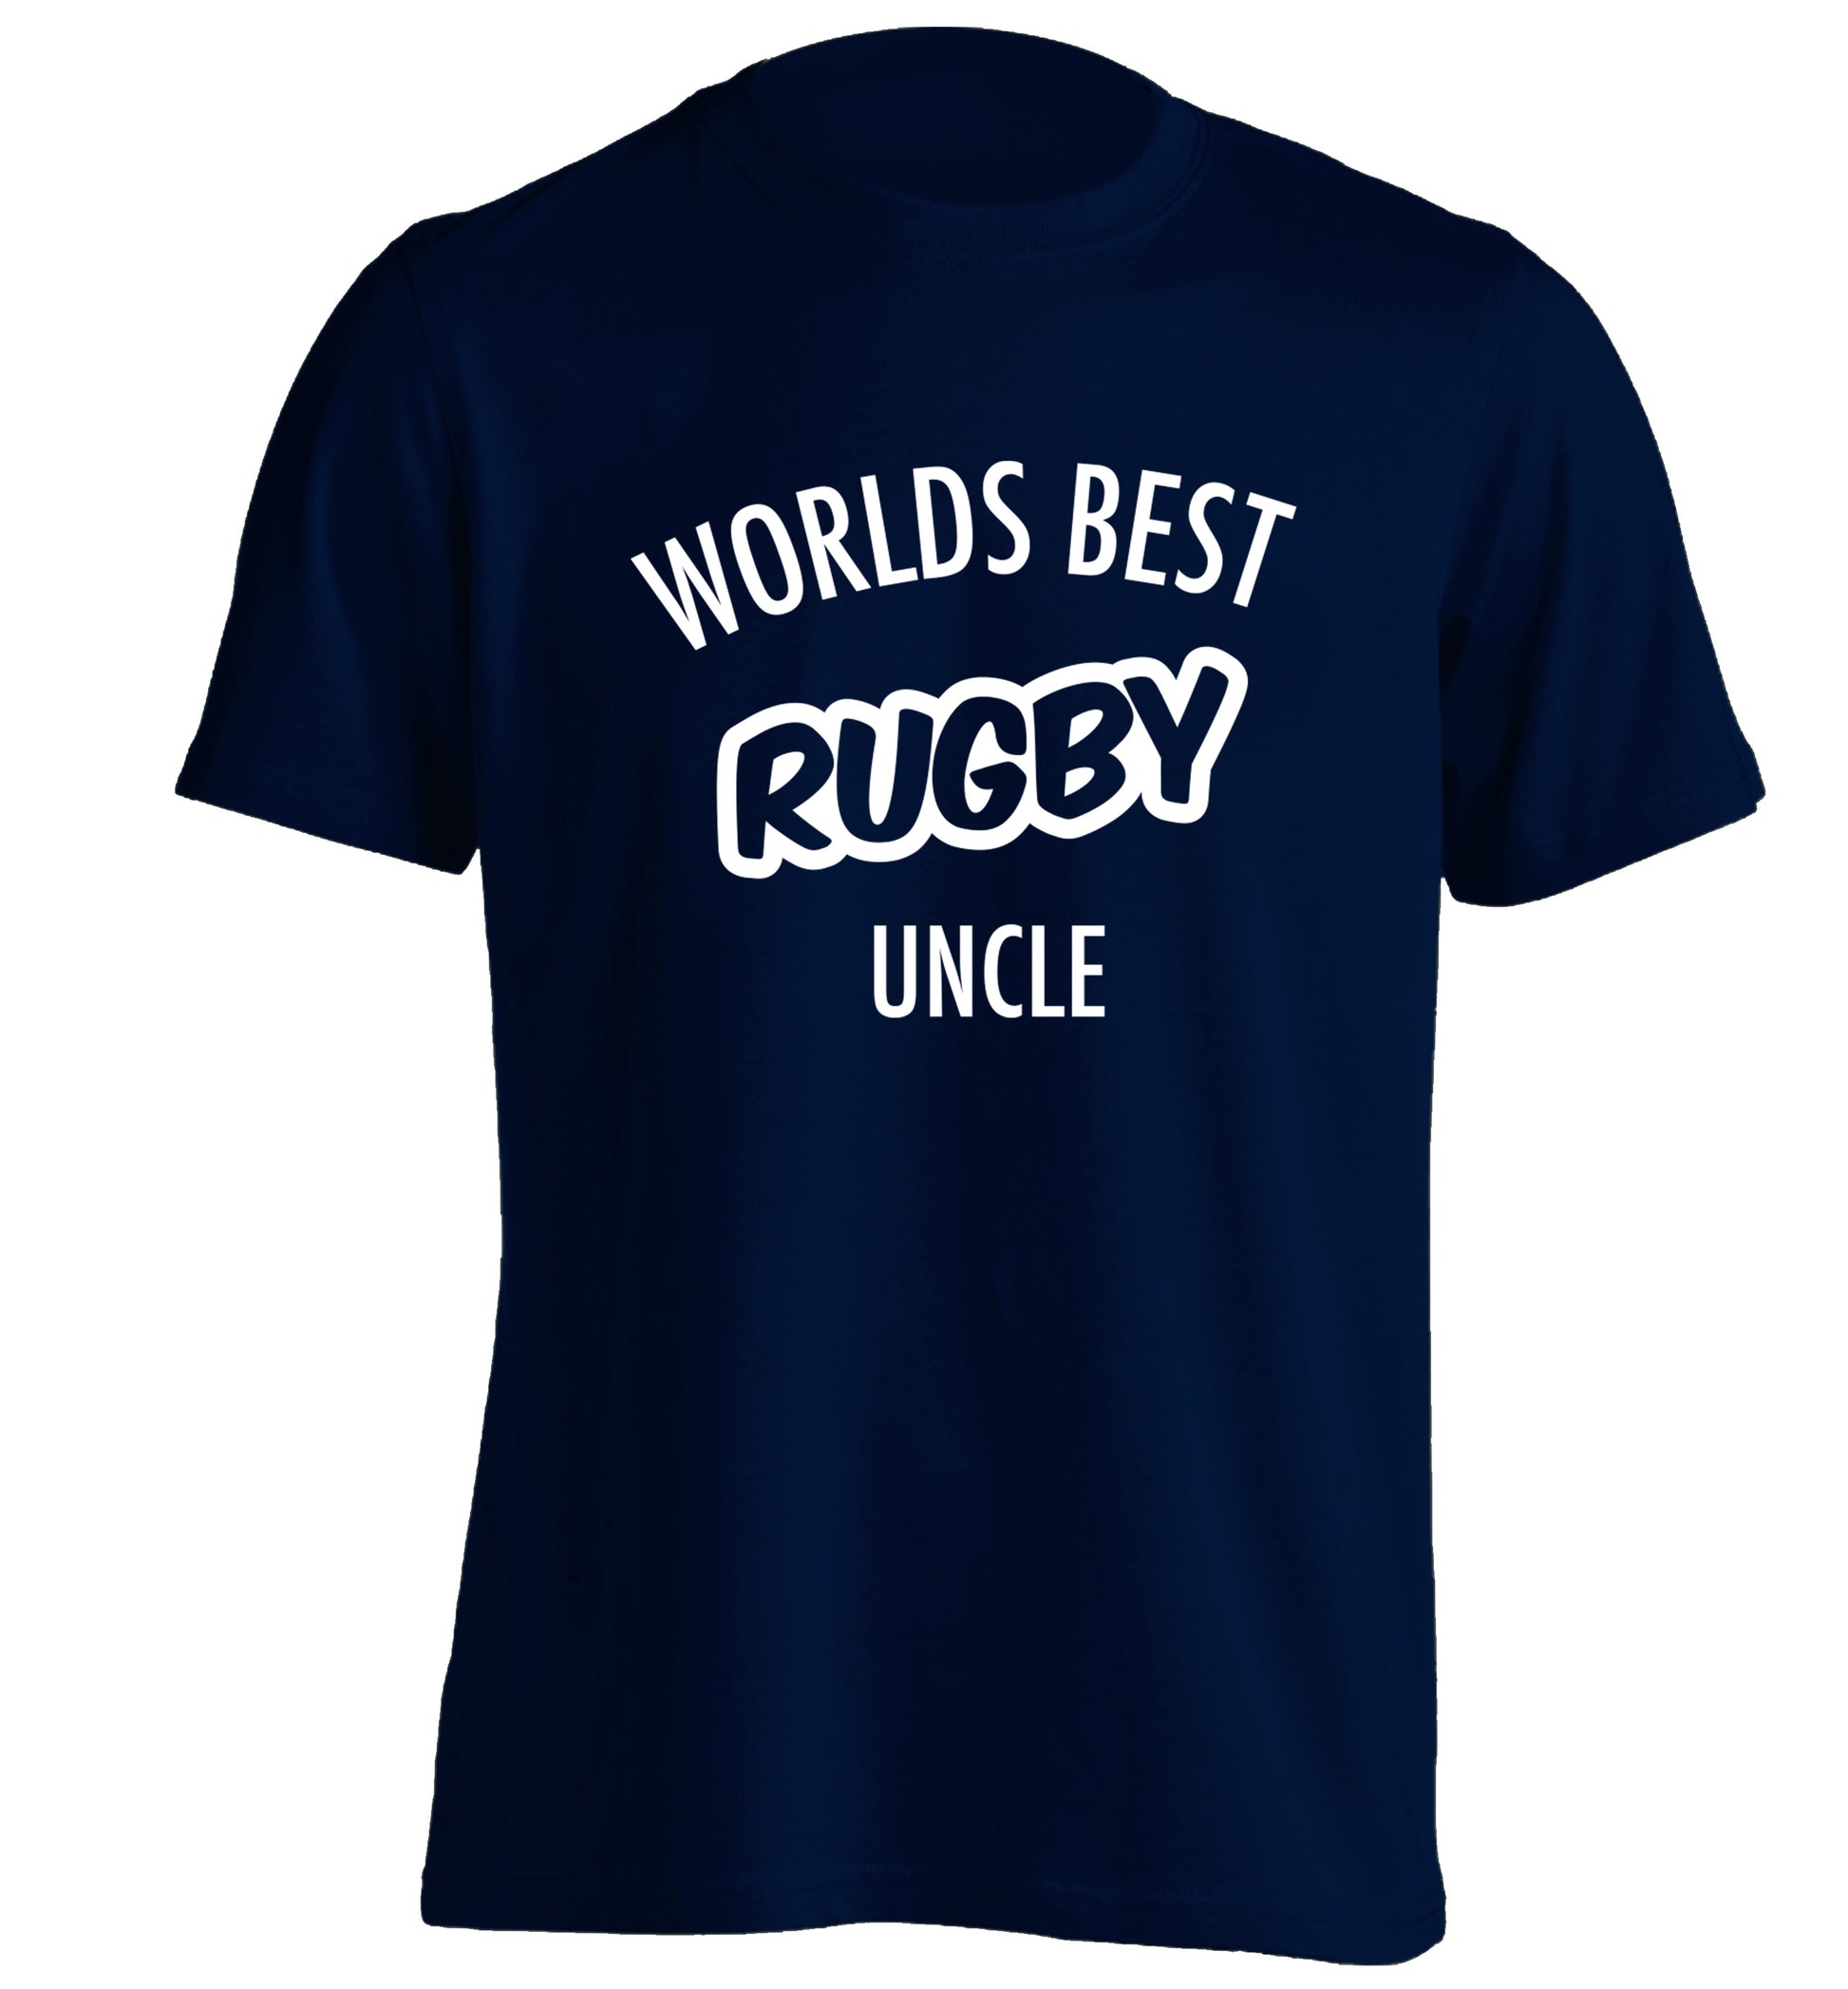 Worlds best rugby uncle adults unisex navy Tshirt 2XL